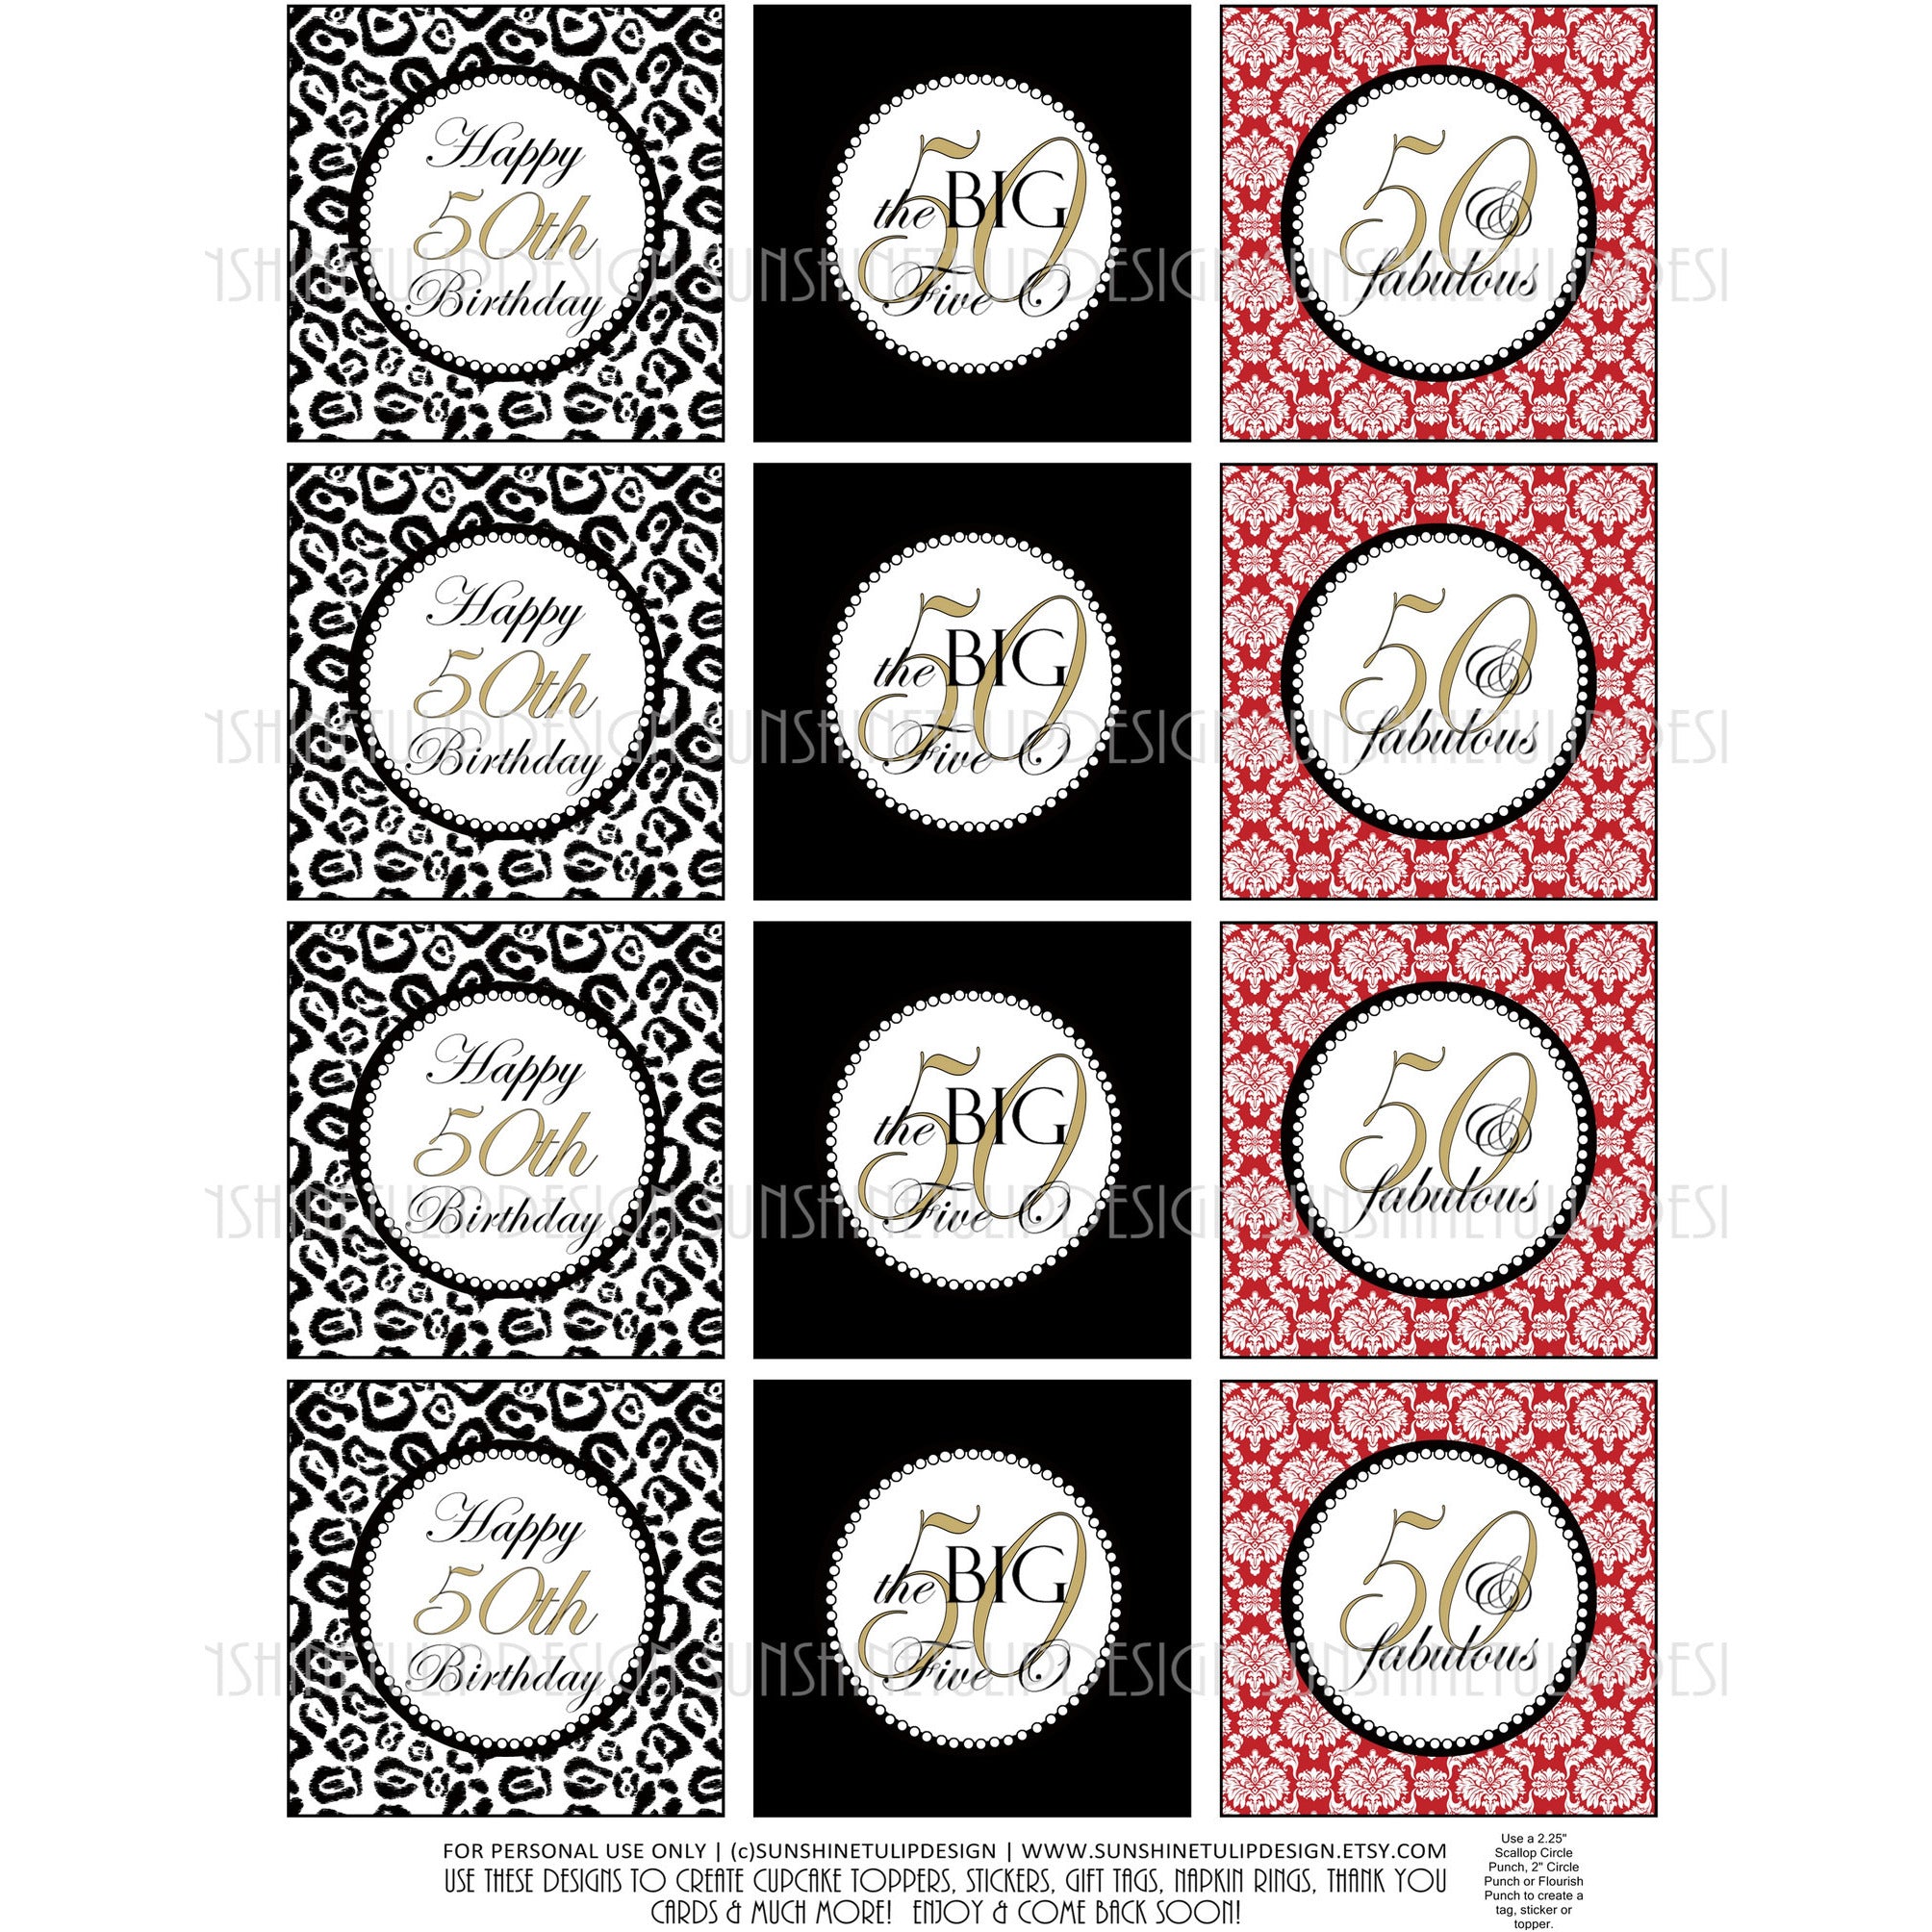 Installeren Larry Belmont koolstof Printable 50th Birthday Cupcake Toppers, Sticker Labels & Party Favor -  Sunshinetulipdesign